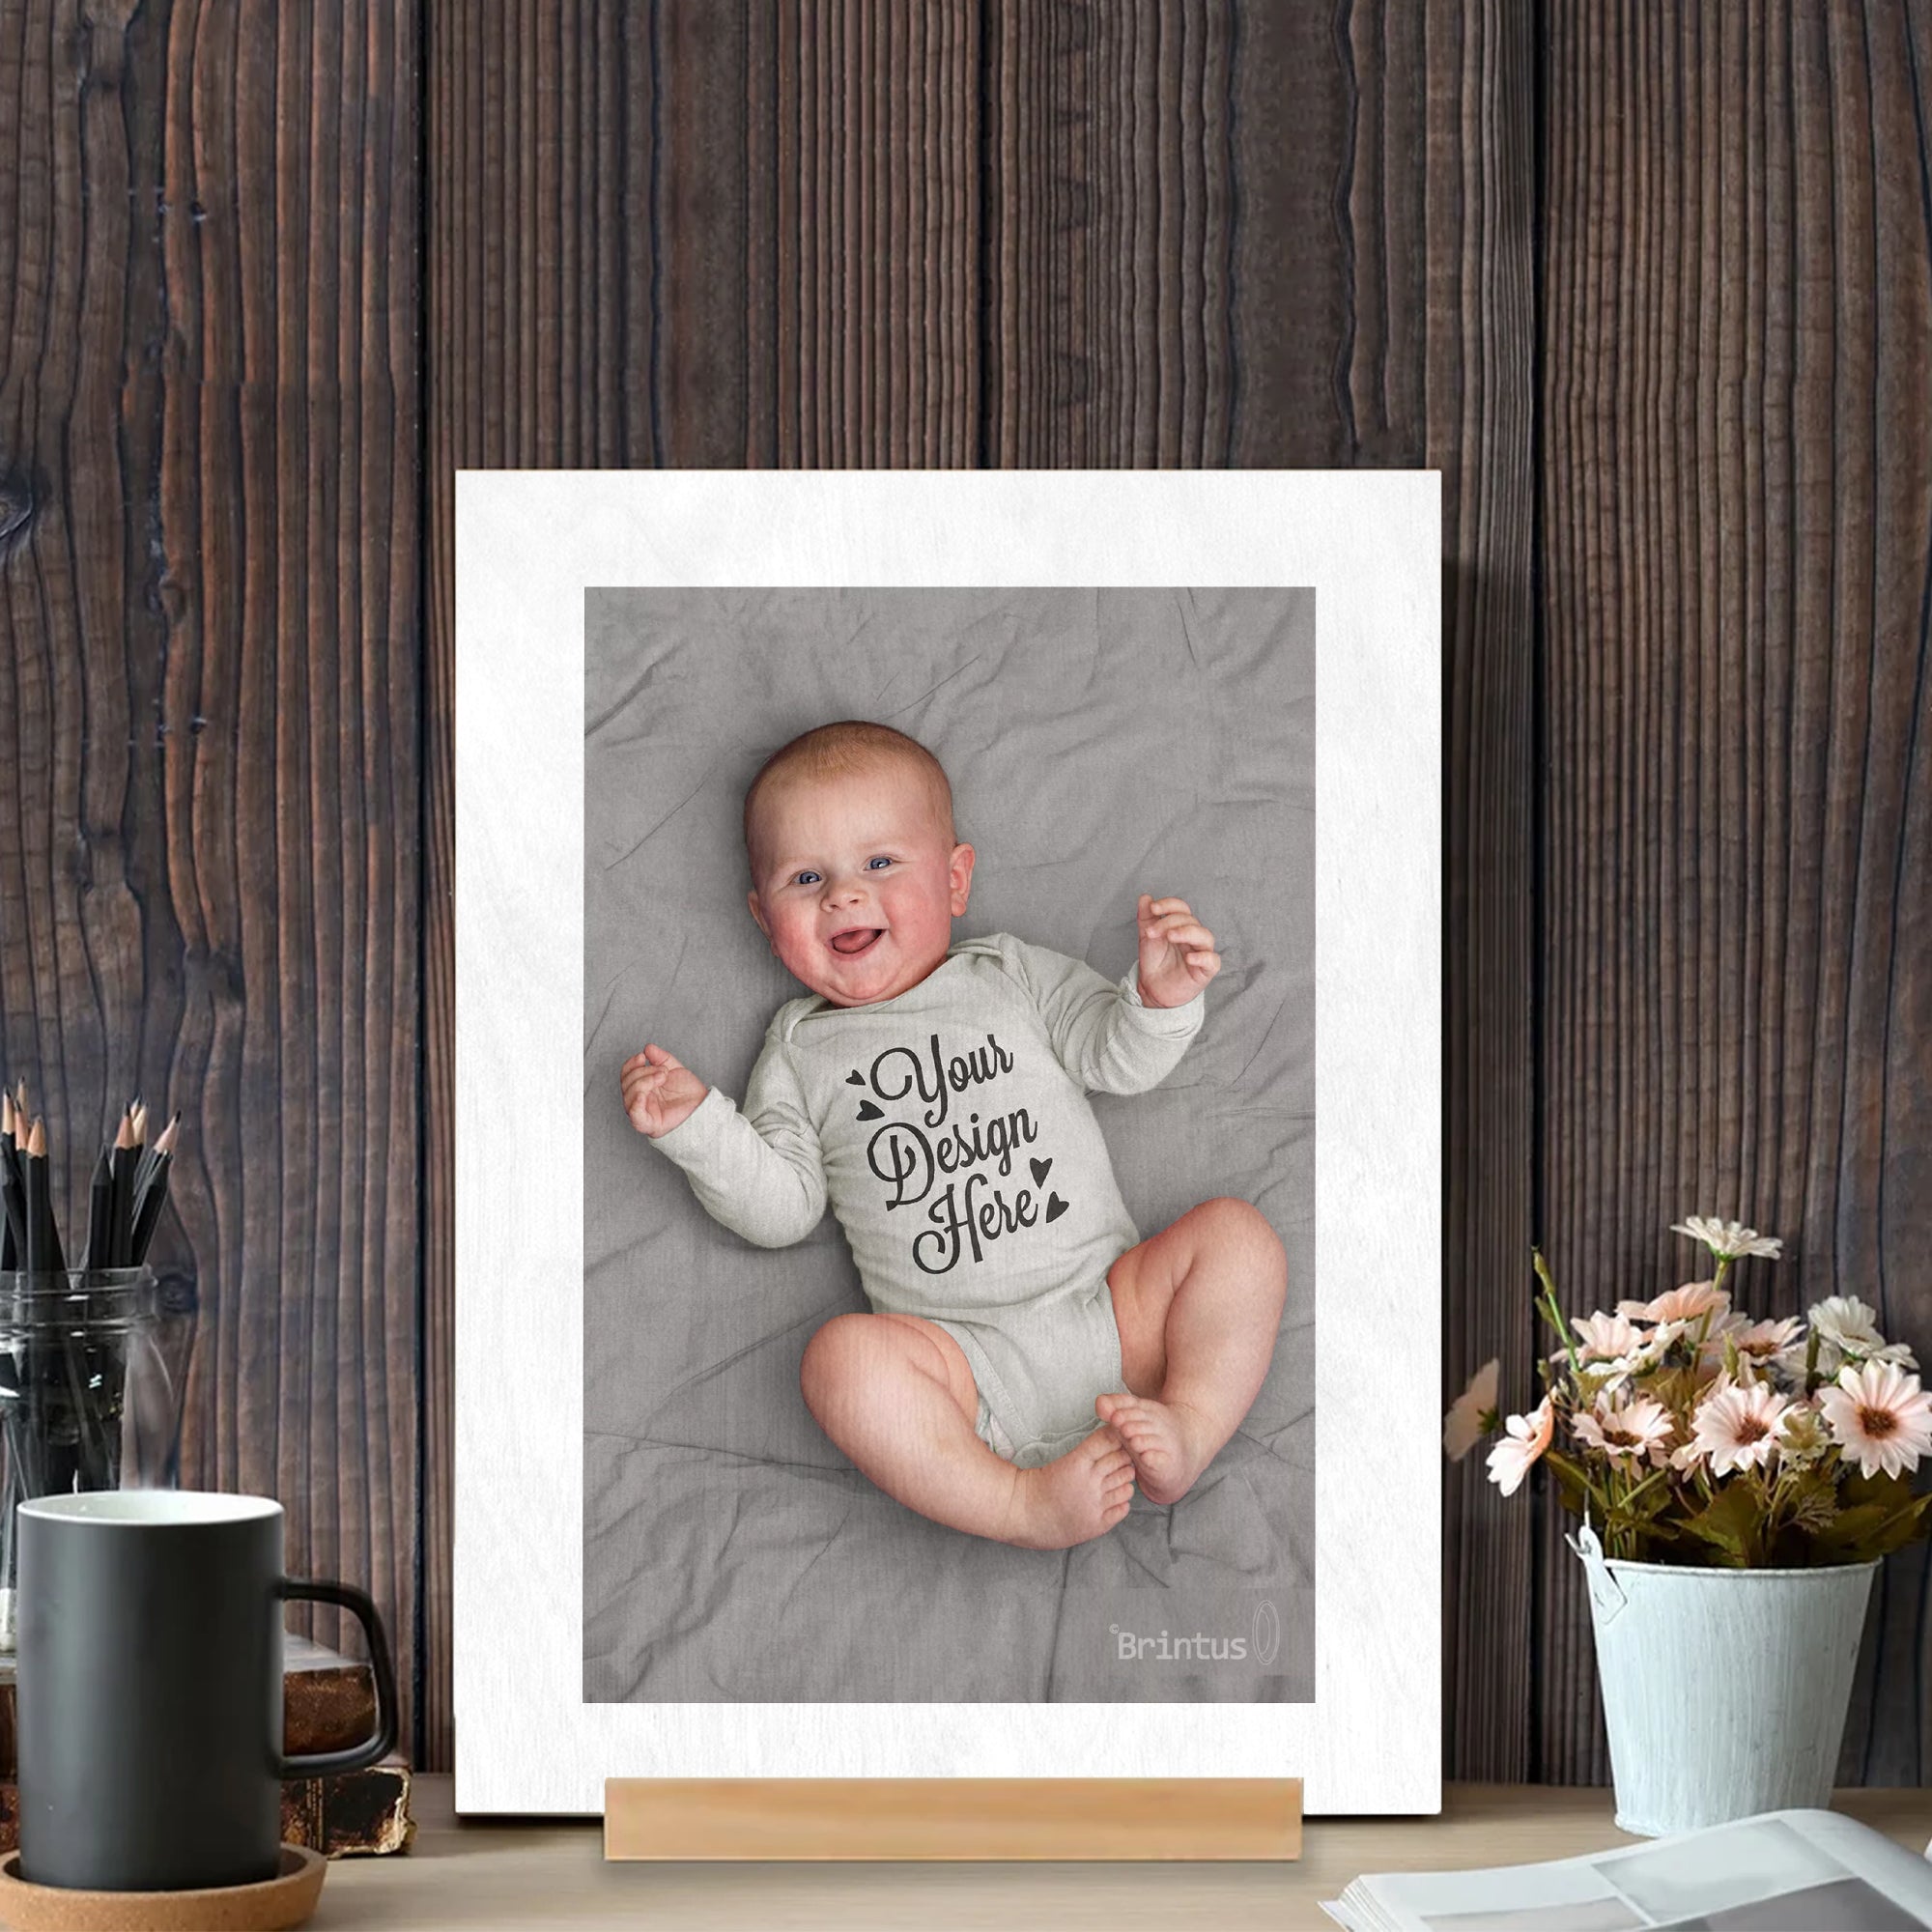 Personalized Your Photo Wood Photo Print Stand